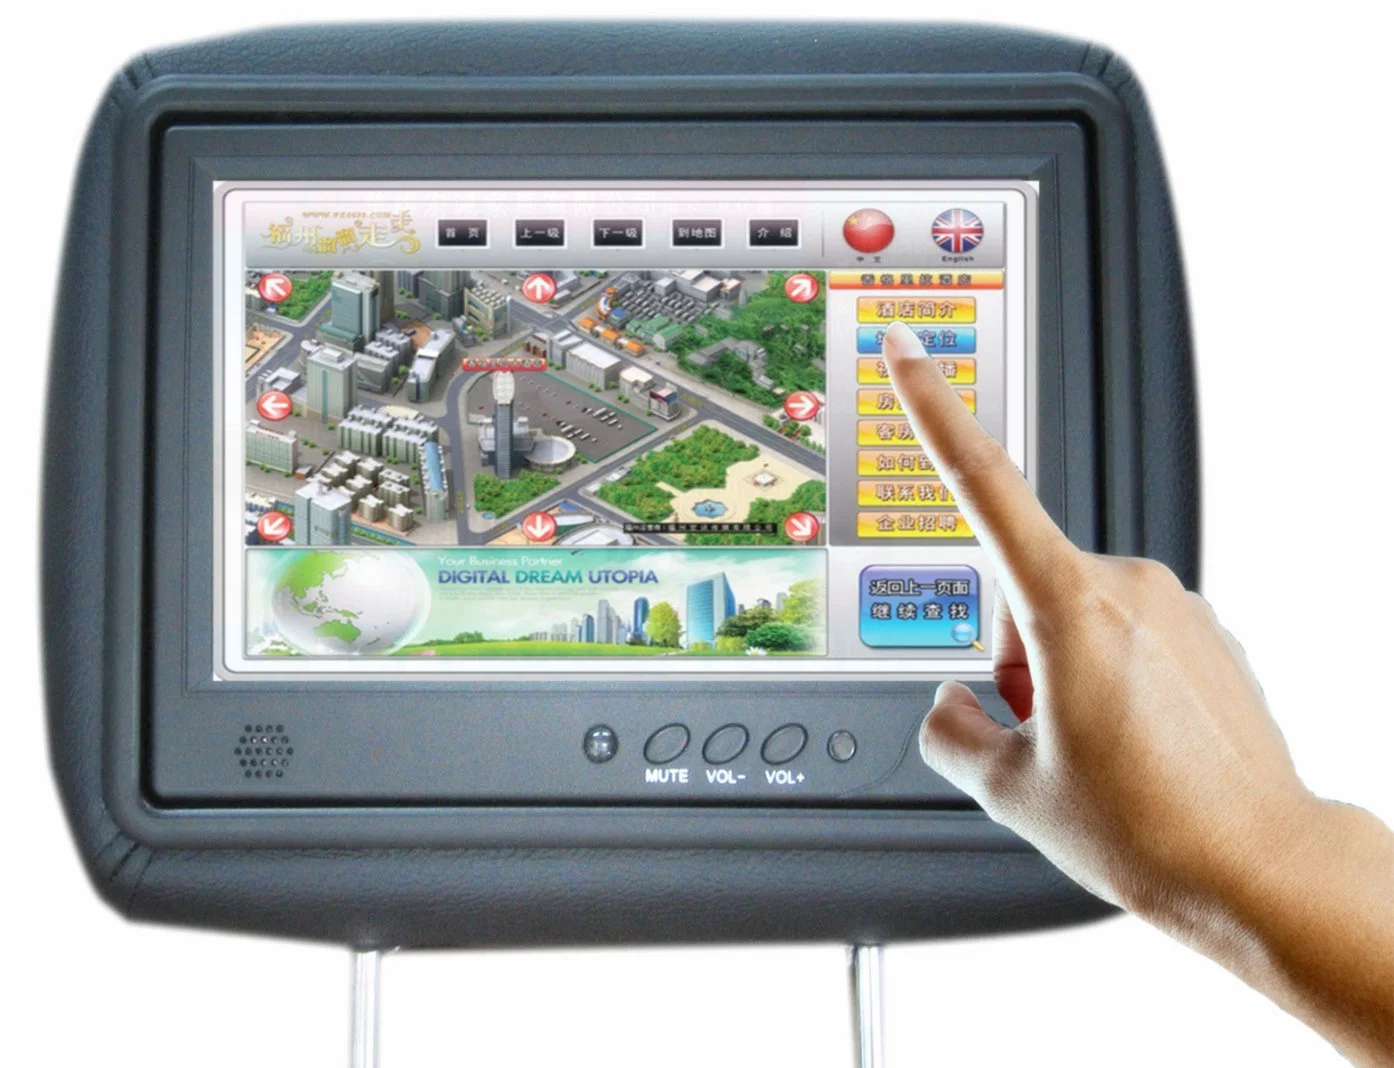 7 Inch Taxi Advertising Headrest Monitor LCD Ad Board 9 Inch Digital Signage Information Taxi Backseat Advertising